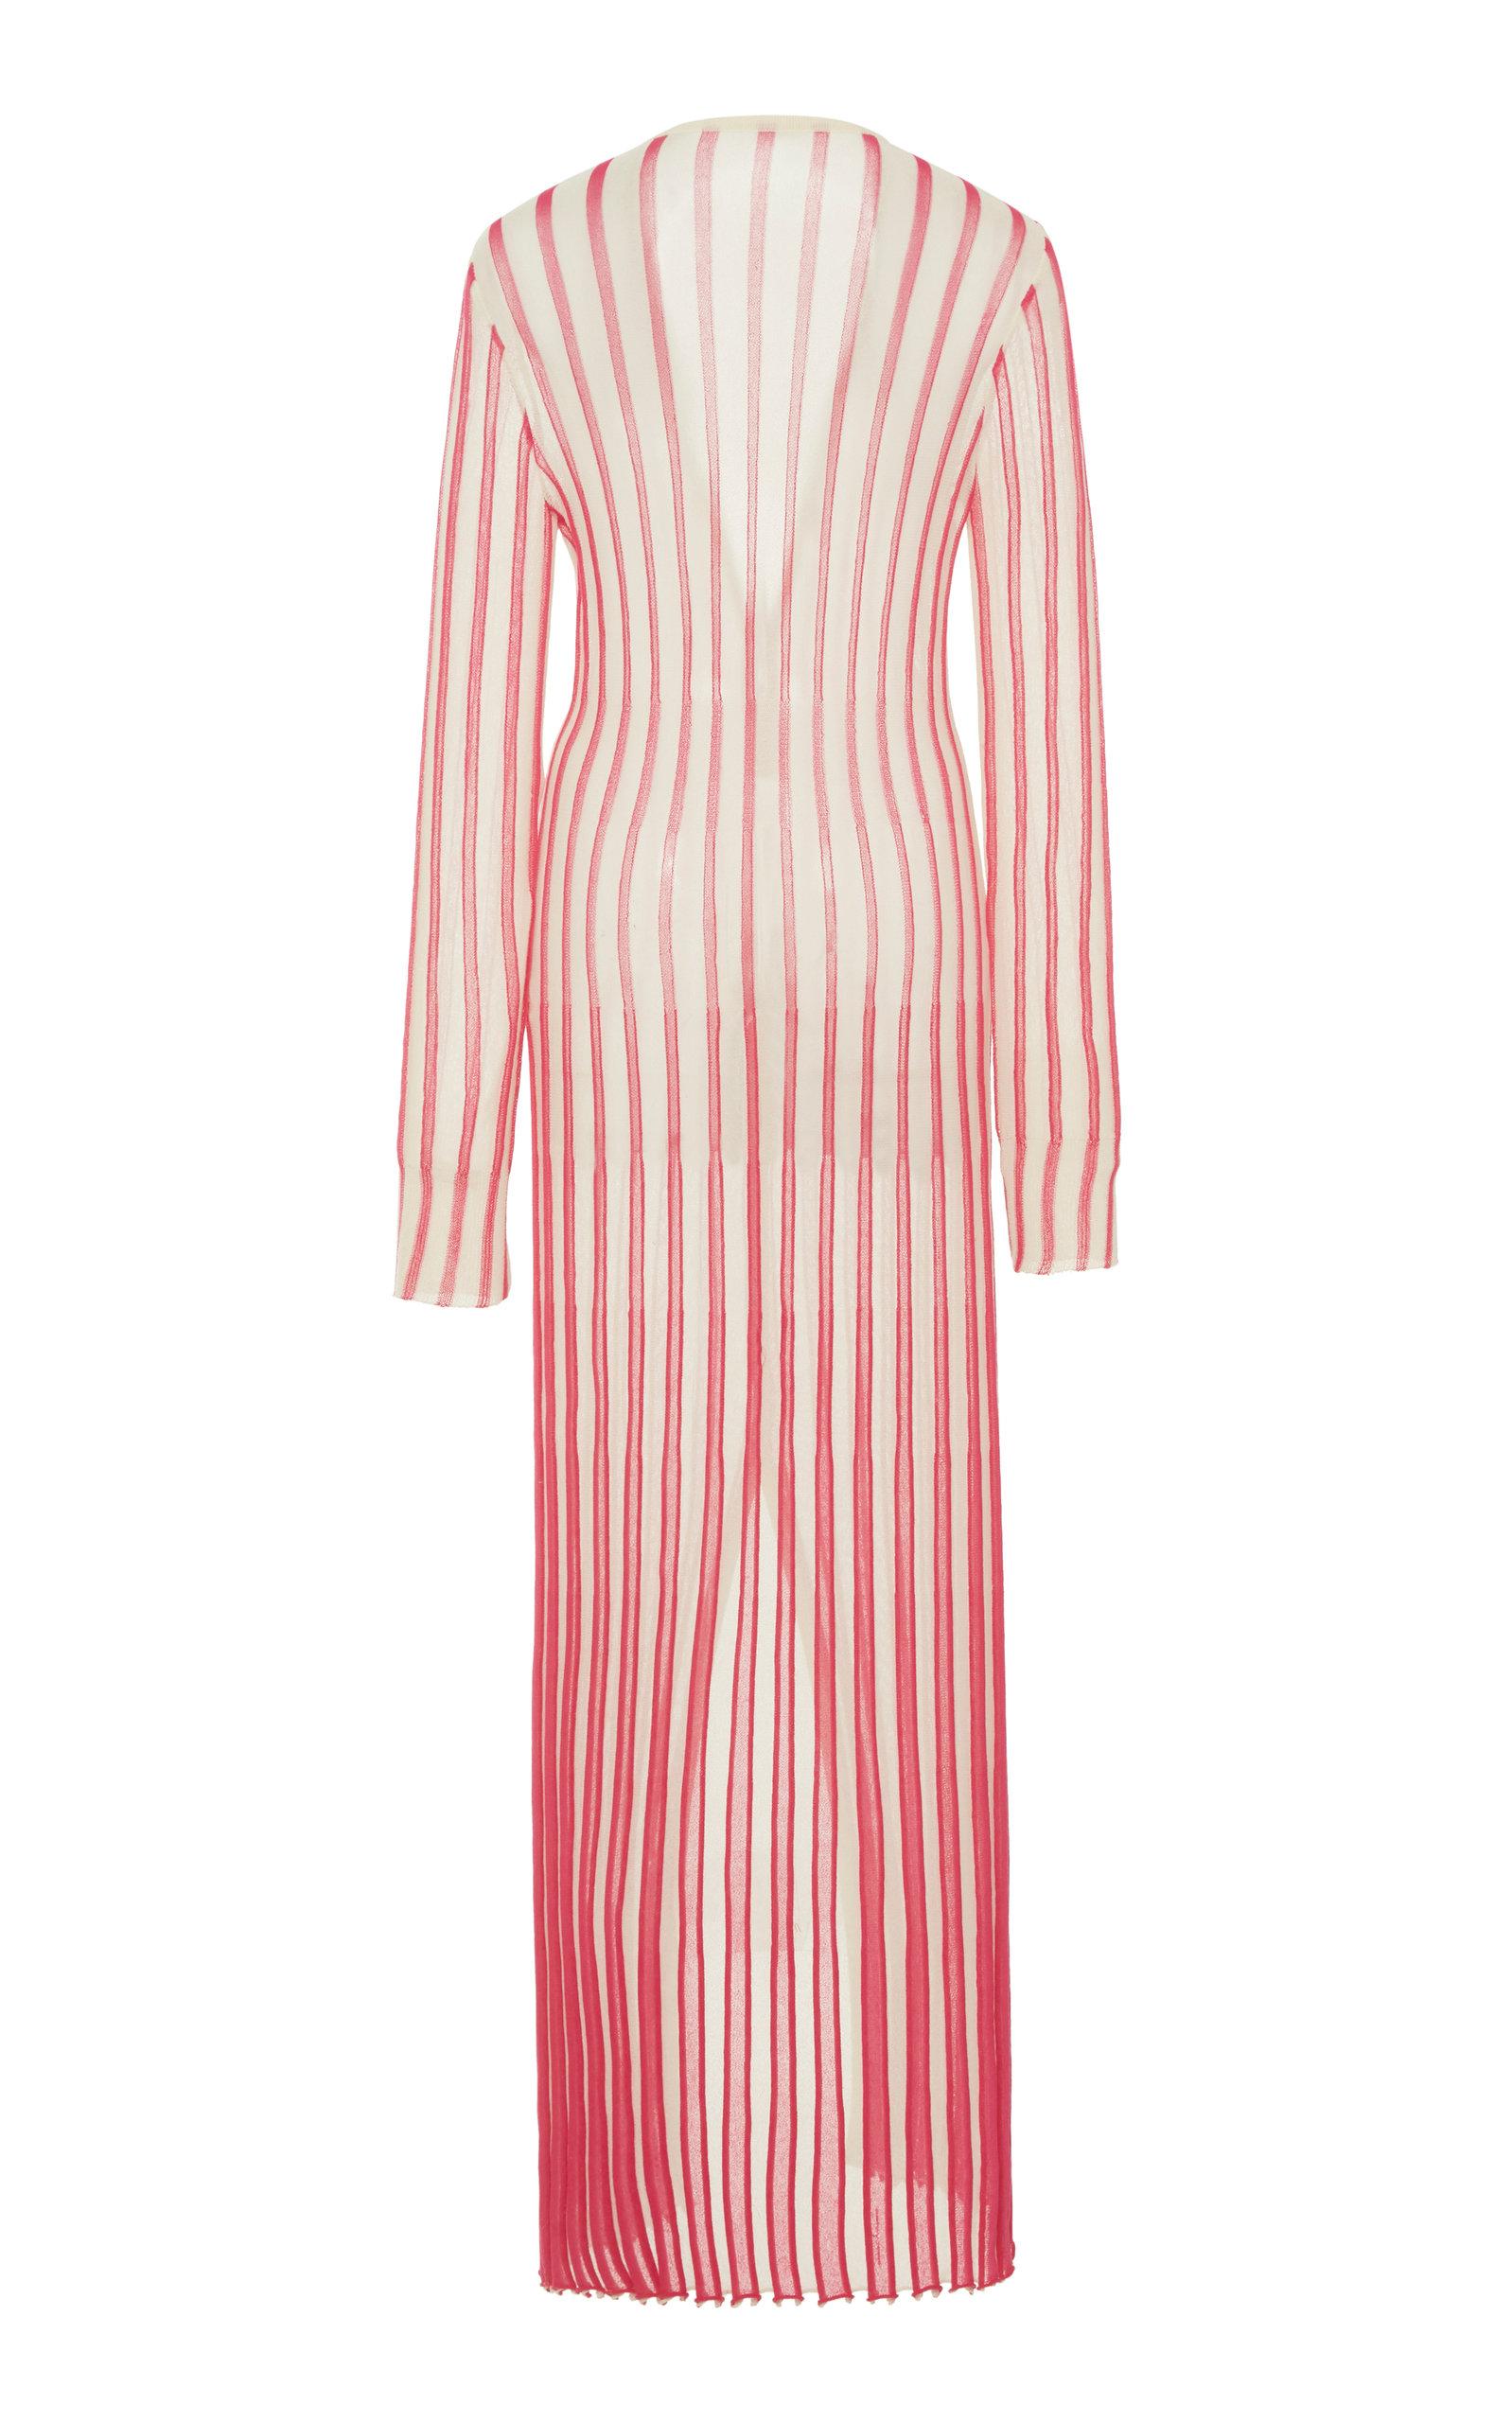 Jacquemus La Robe Jacques Striped Knit Maxi Dress in Pink - Lyst